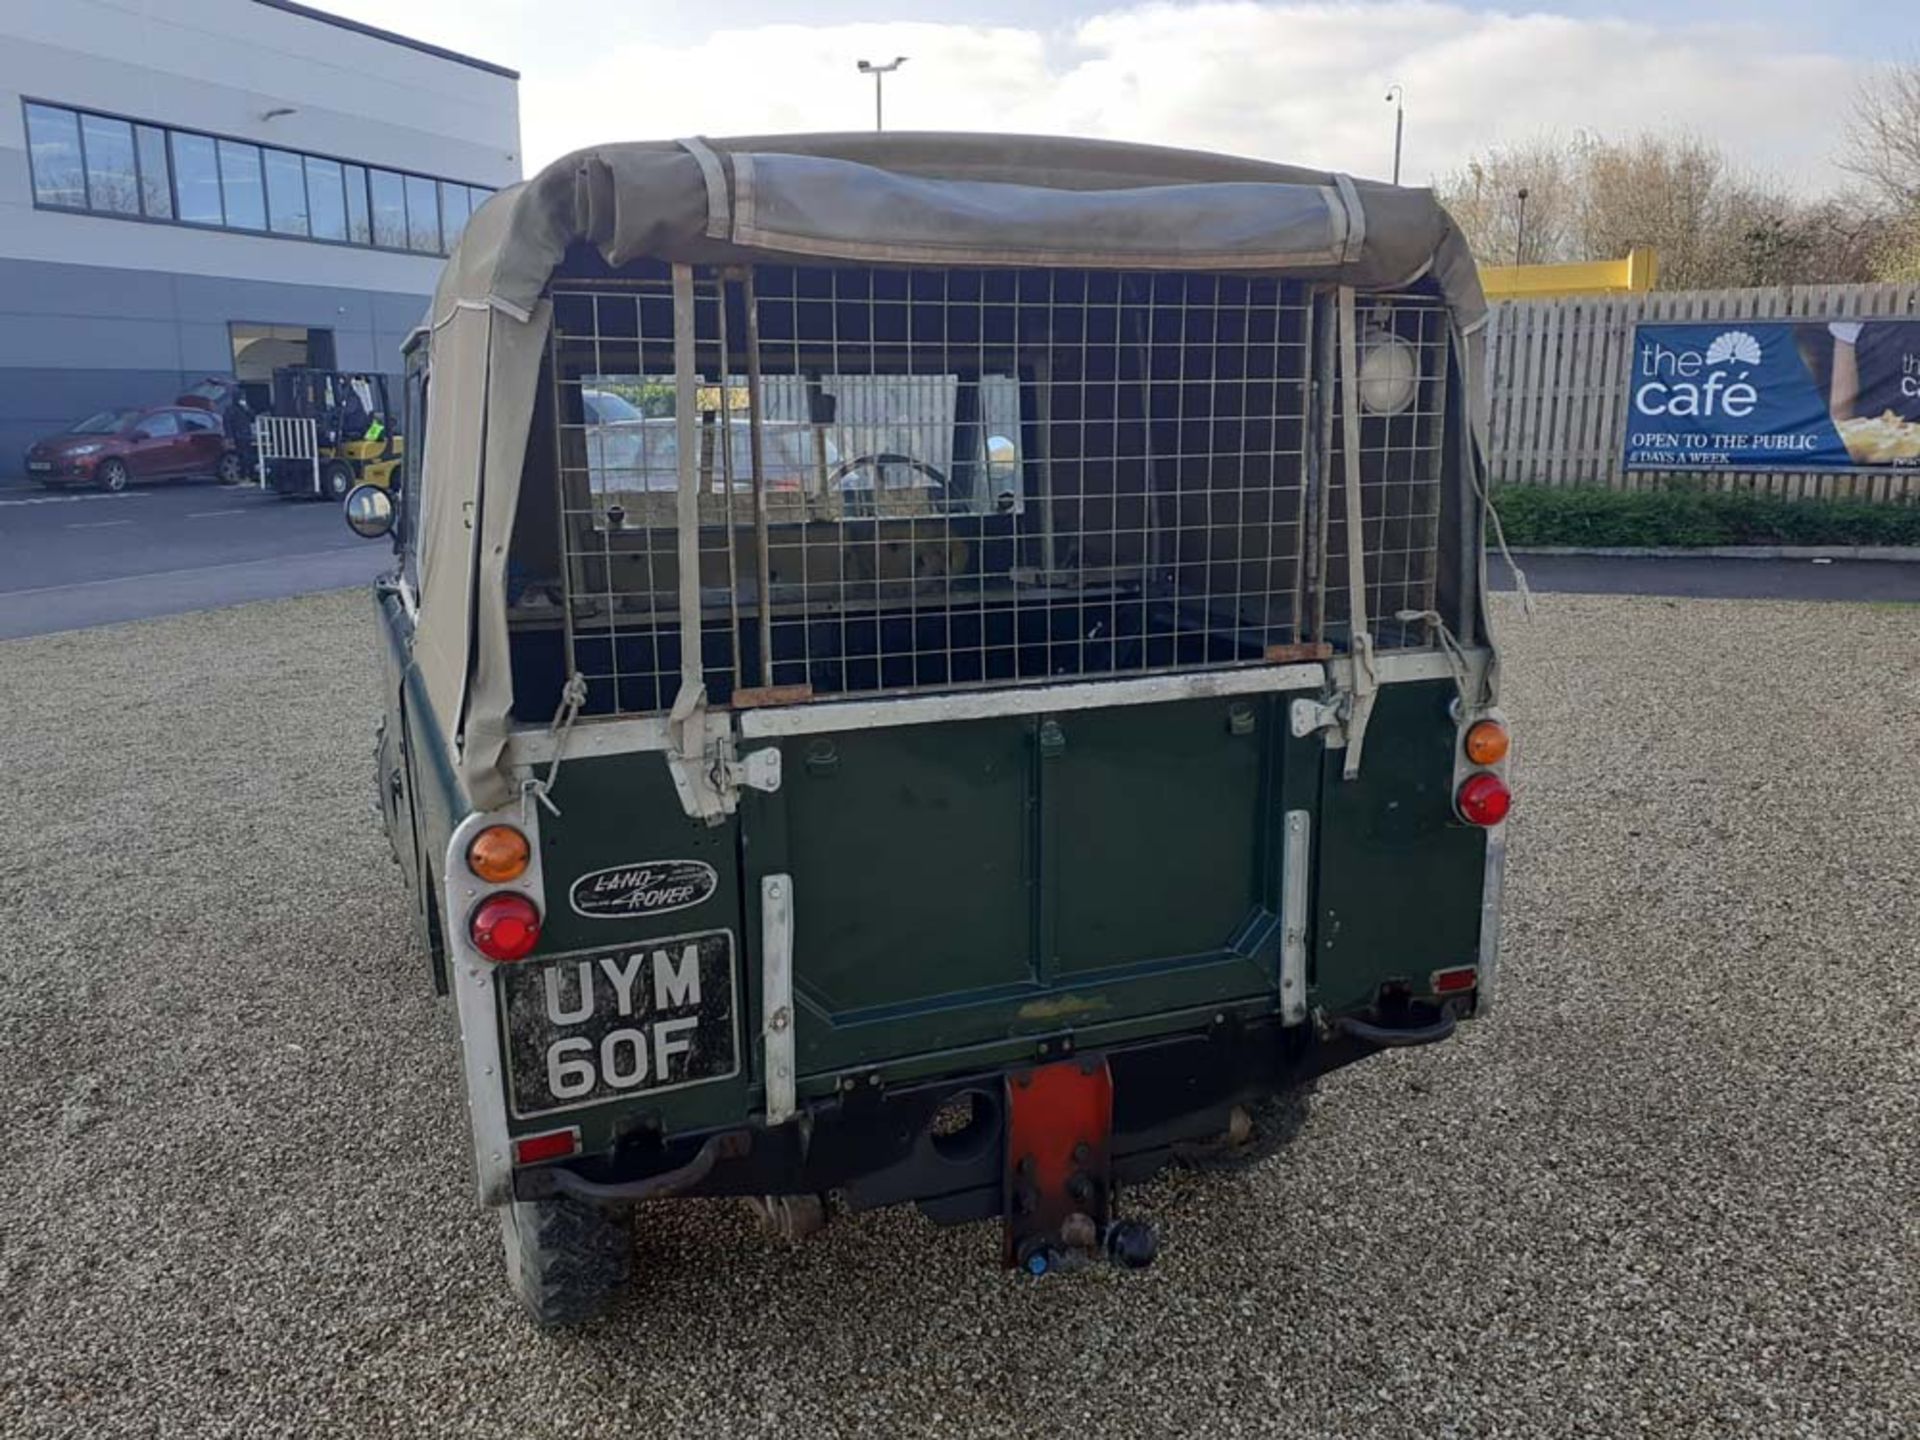 UYM 60F (1968) Land Rover Series 2A 88 inch (SWB) first registered 15/05/1968, chassis no. - Image 5 of 16